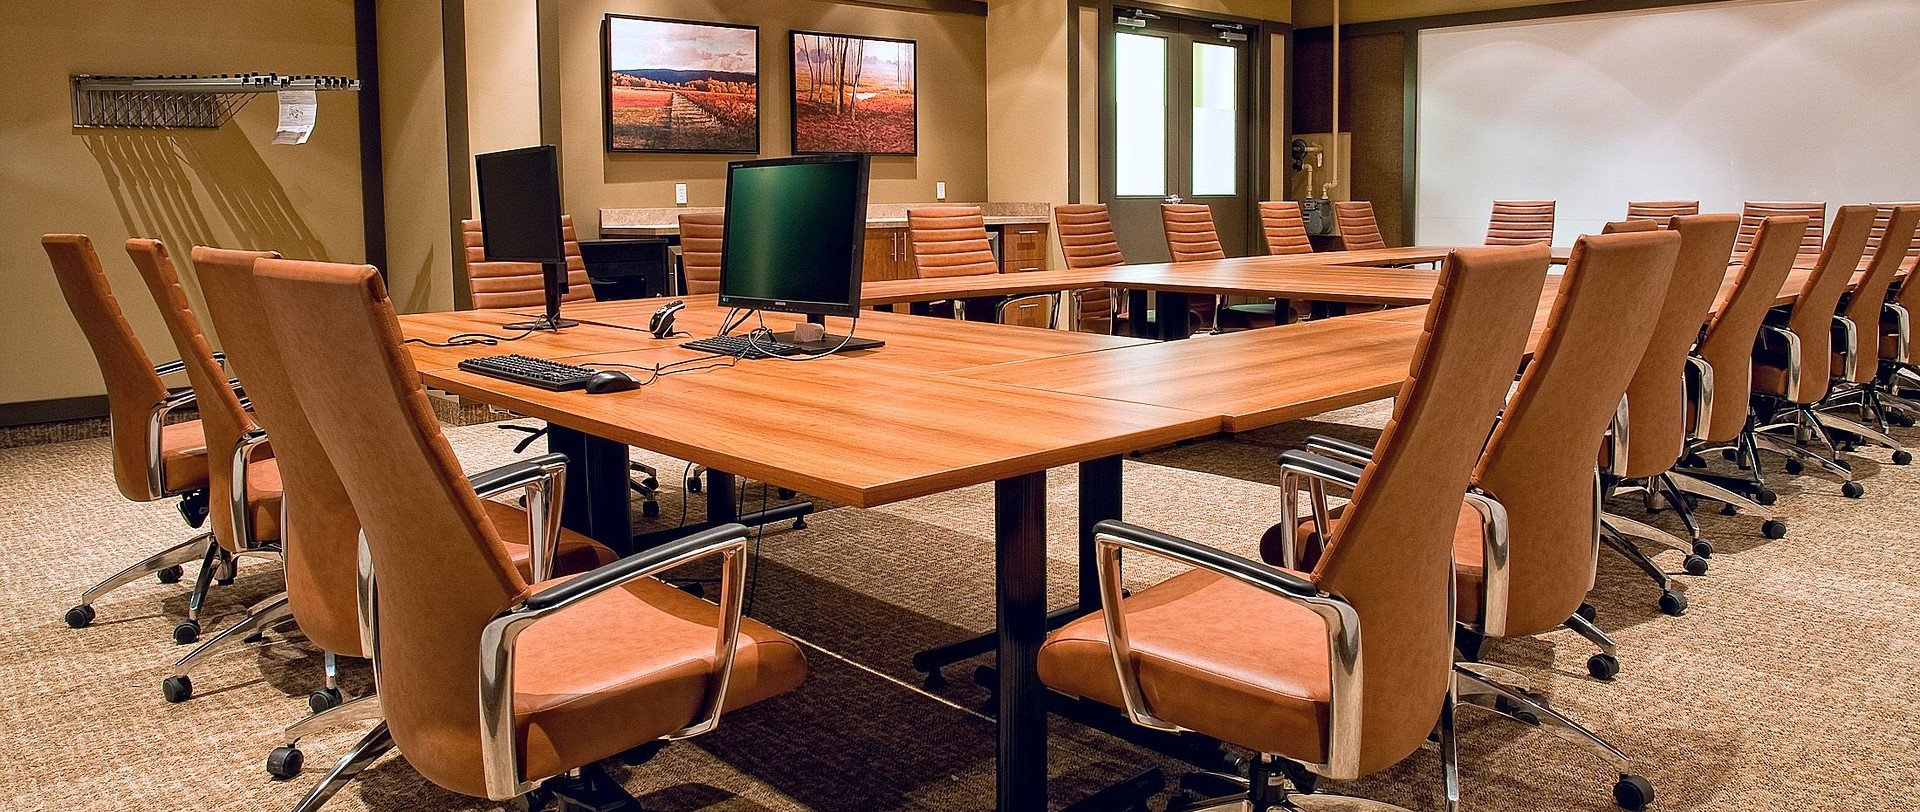 Boardroom with table, chairs, open computer